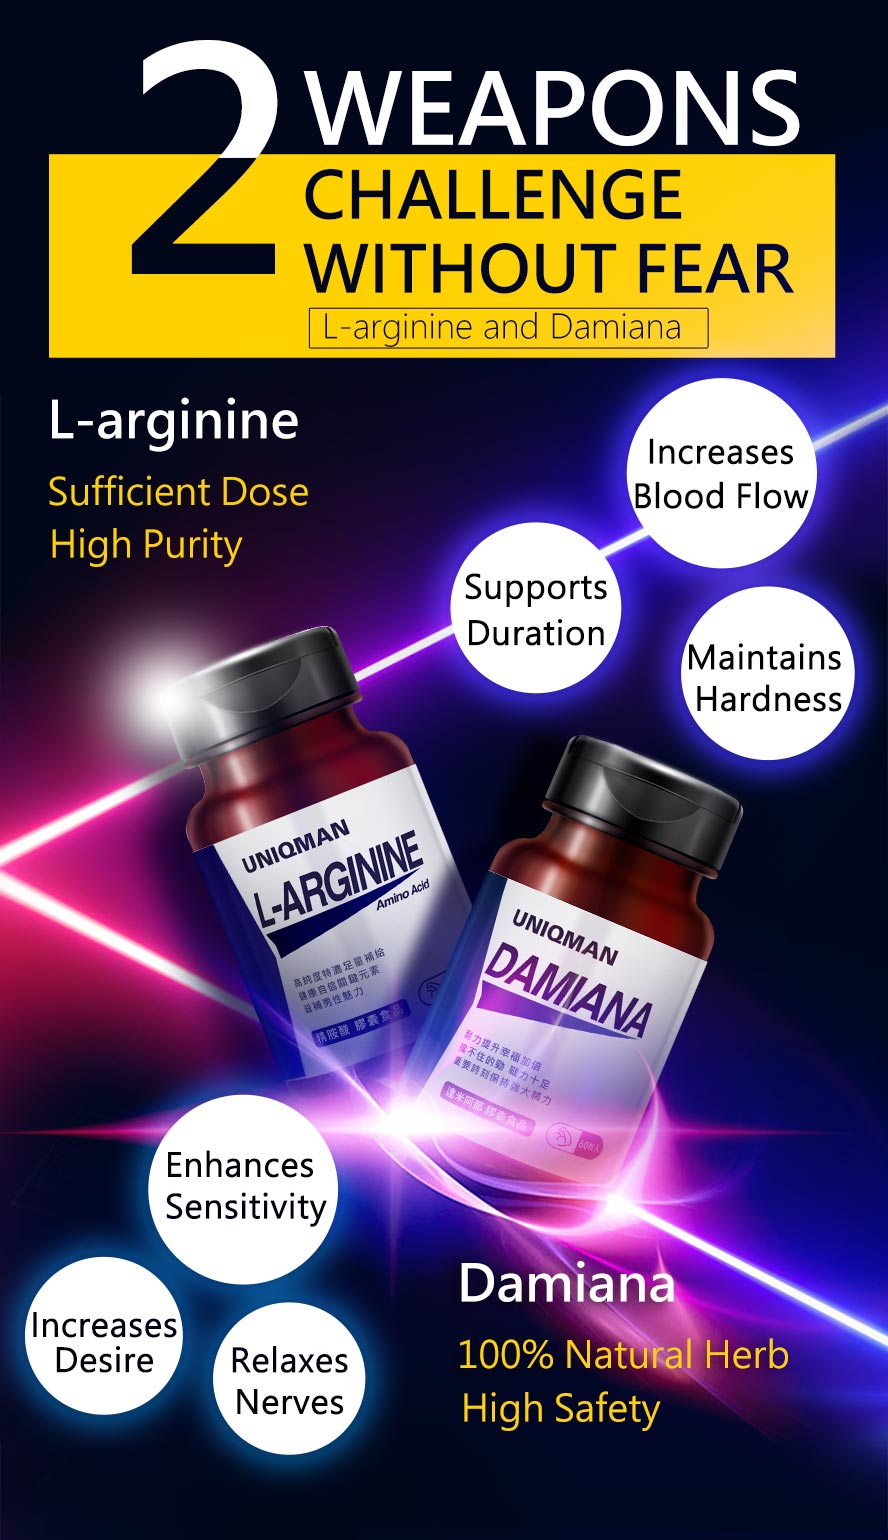 UNIQMAN Arginine increase nitric oxide that can dilate blood vessels, improve endurance and long-lastingness